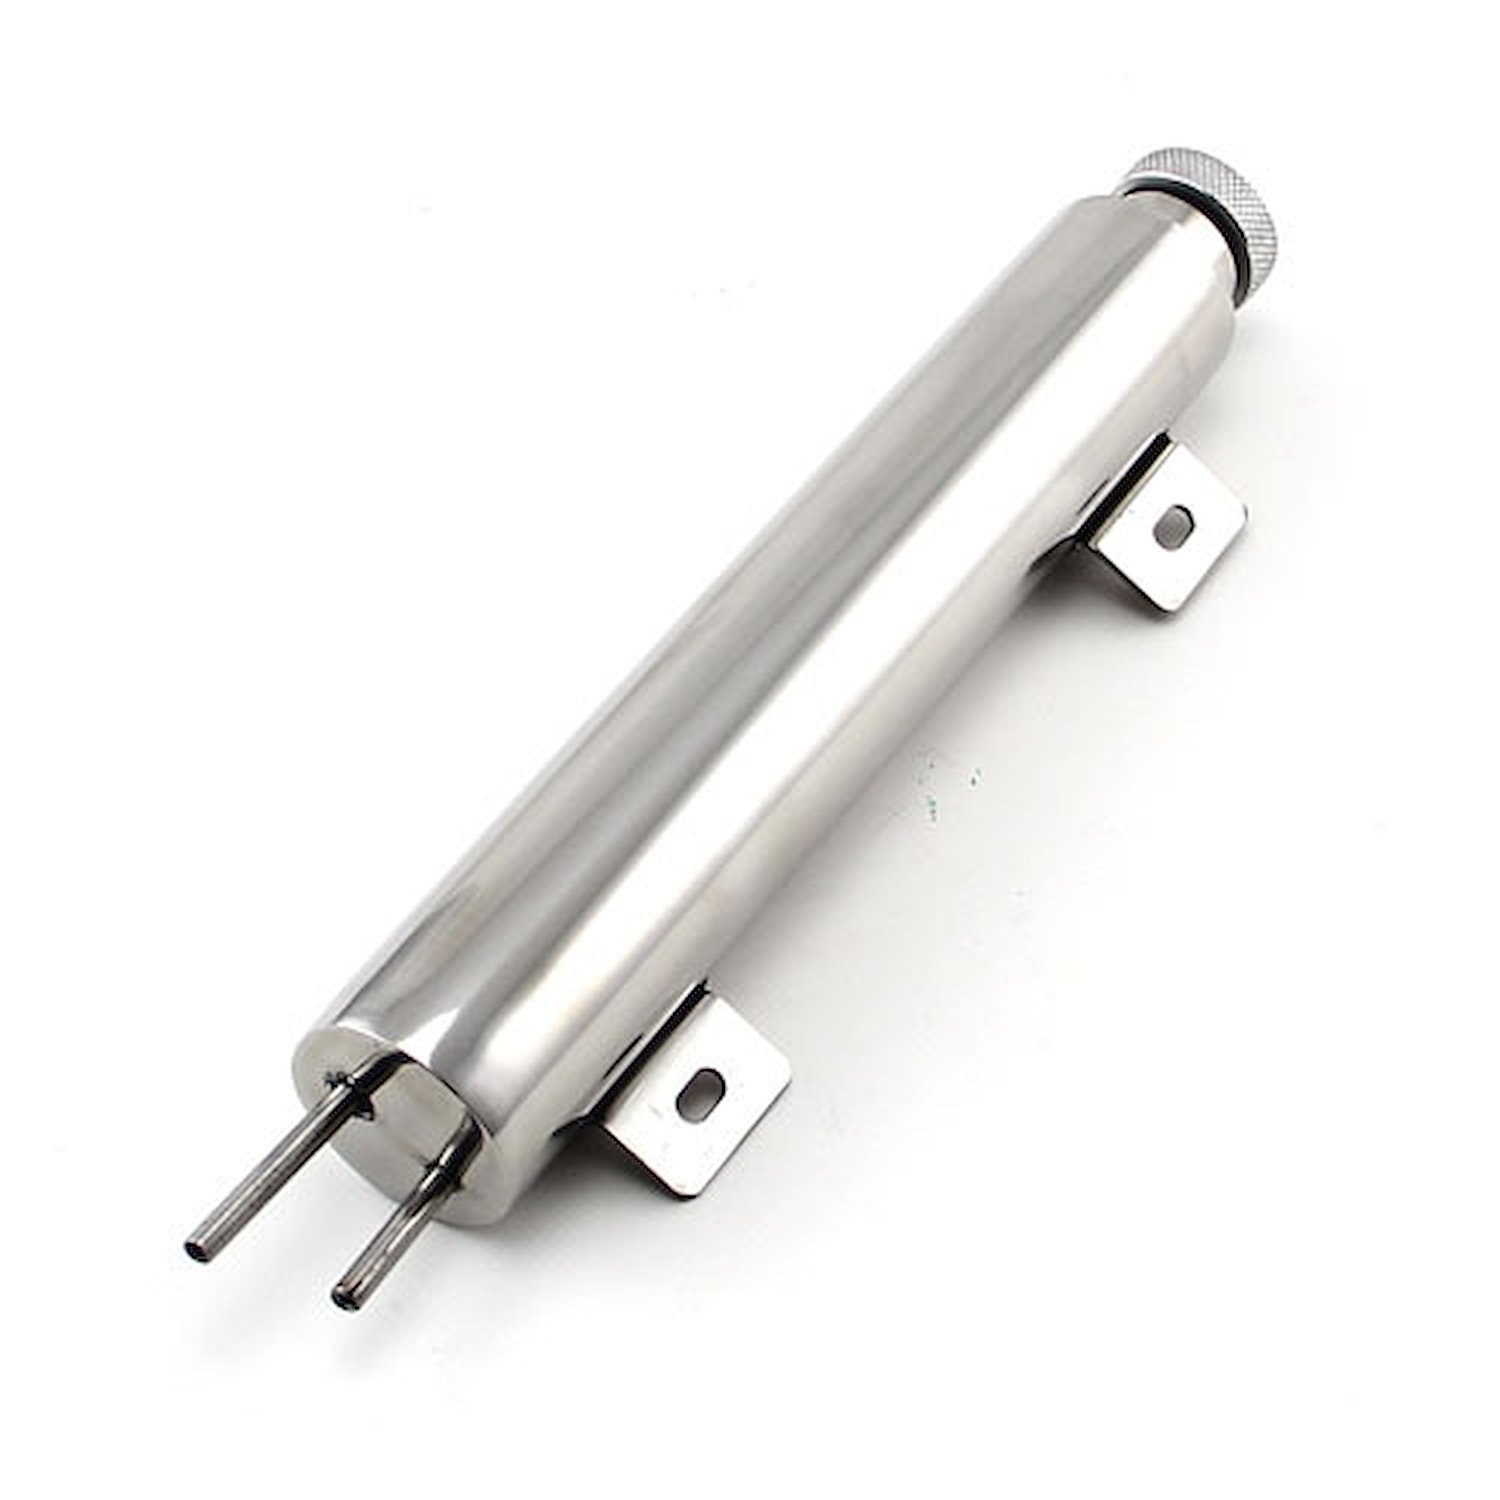 2 x 15 Stainless Steel Overflow Tank With Mounting Bracket Kit